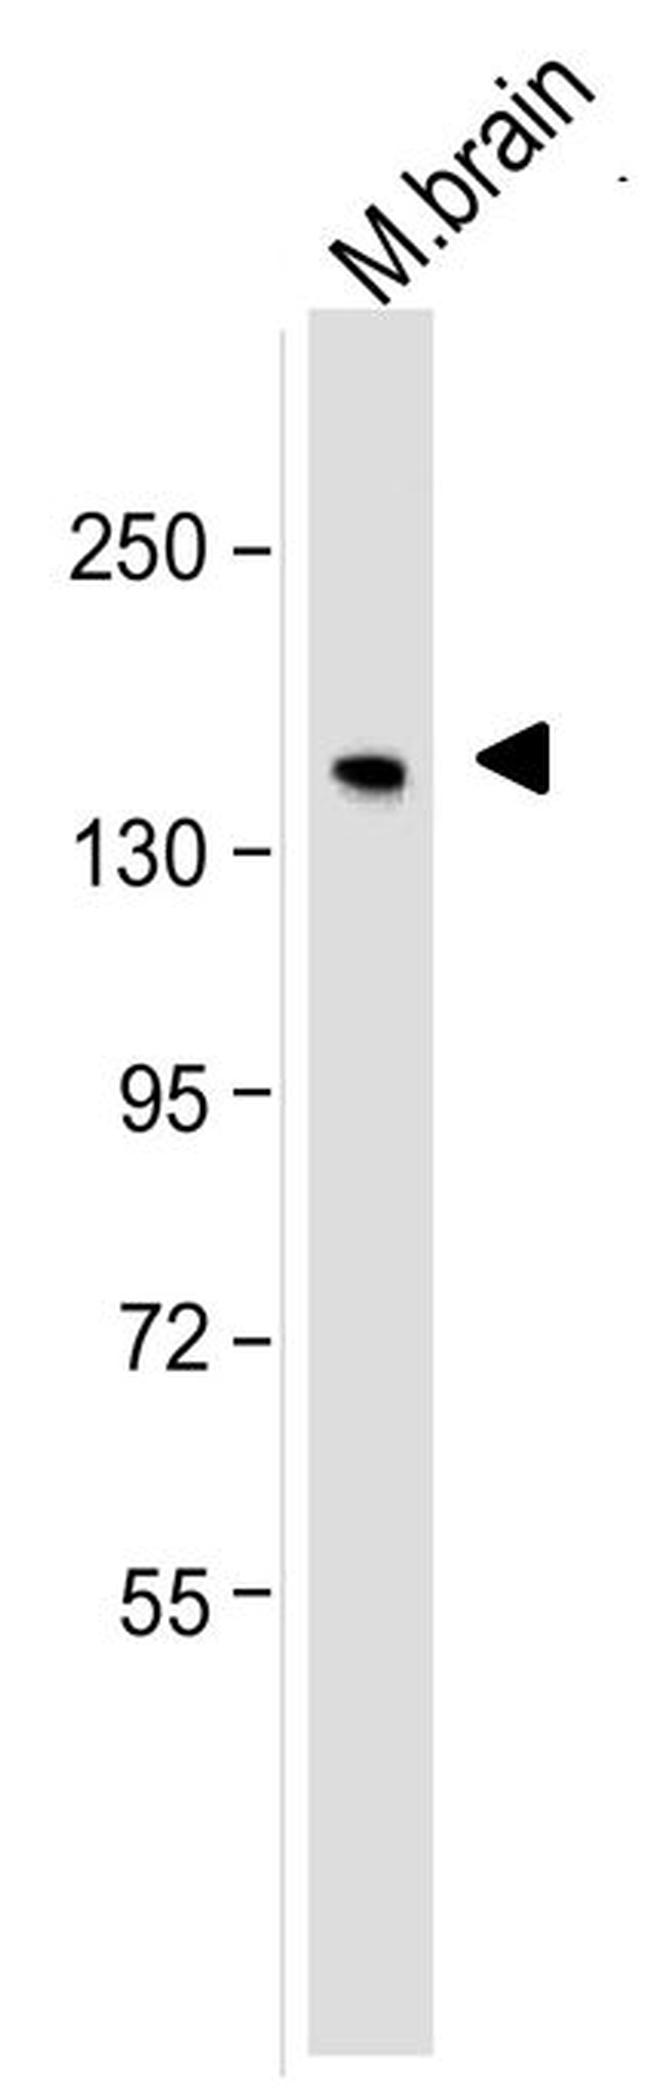 NEFM / NF-M Antibody - Western blot analysis of neurofilament, medium chain was performed by loading 25ug of mouse brain tissue lysate per well onto a polyacrylamide gel. Proteins were transferred to a PVDF membrane and blocked. NF-M was detected at ~160kD using a neurofilament, medium chain antibody at a dilution of 2 µg/mL in blocking buffer overnight at 4C, followed by a HRP-labeled secondary antibody for 1 hour at room temperature and detection with a chemiluminescent substrate.